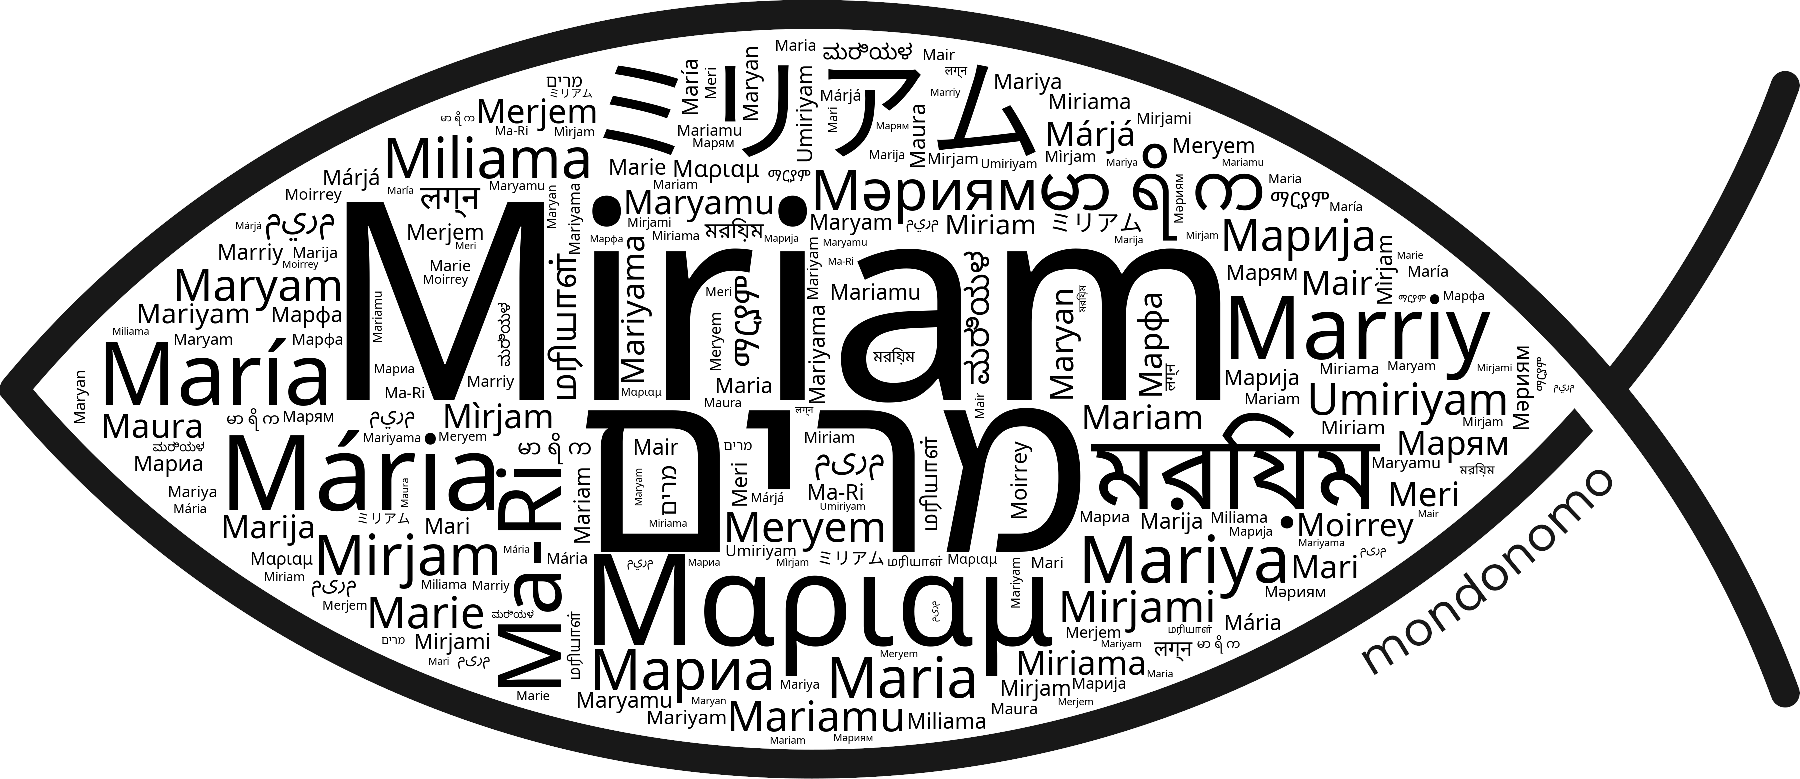 Name Miriam in the world's Bibles